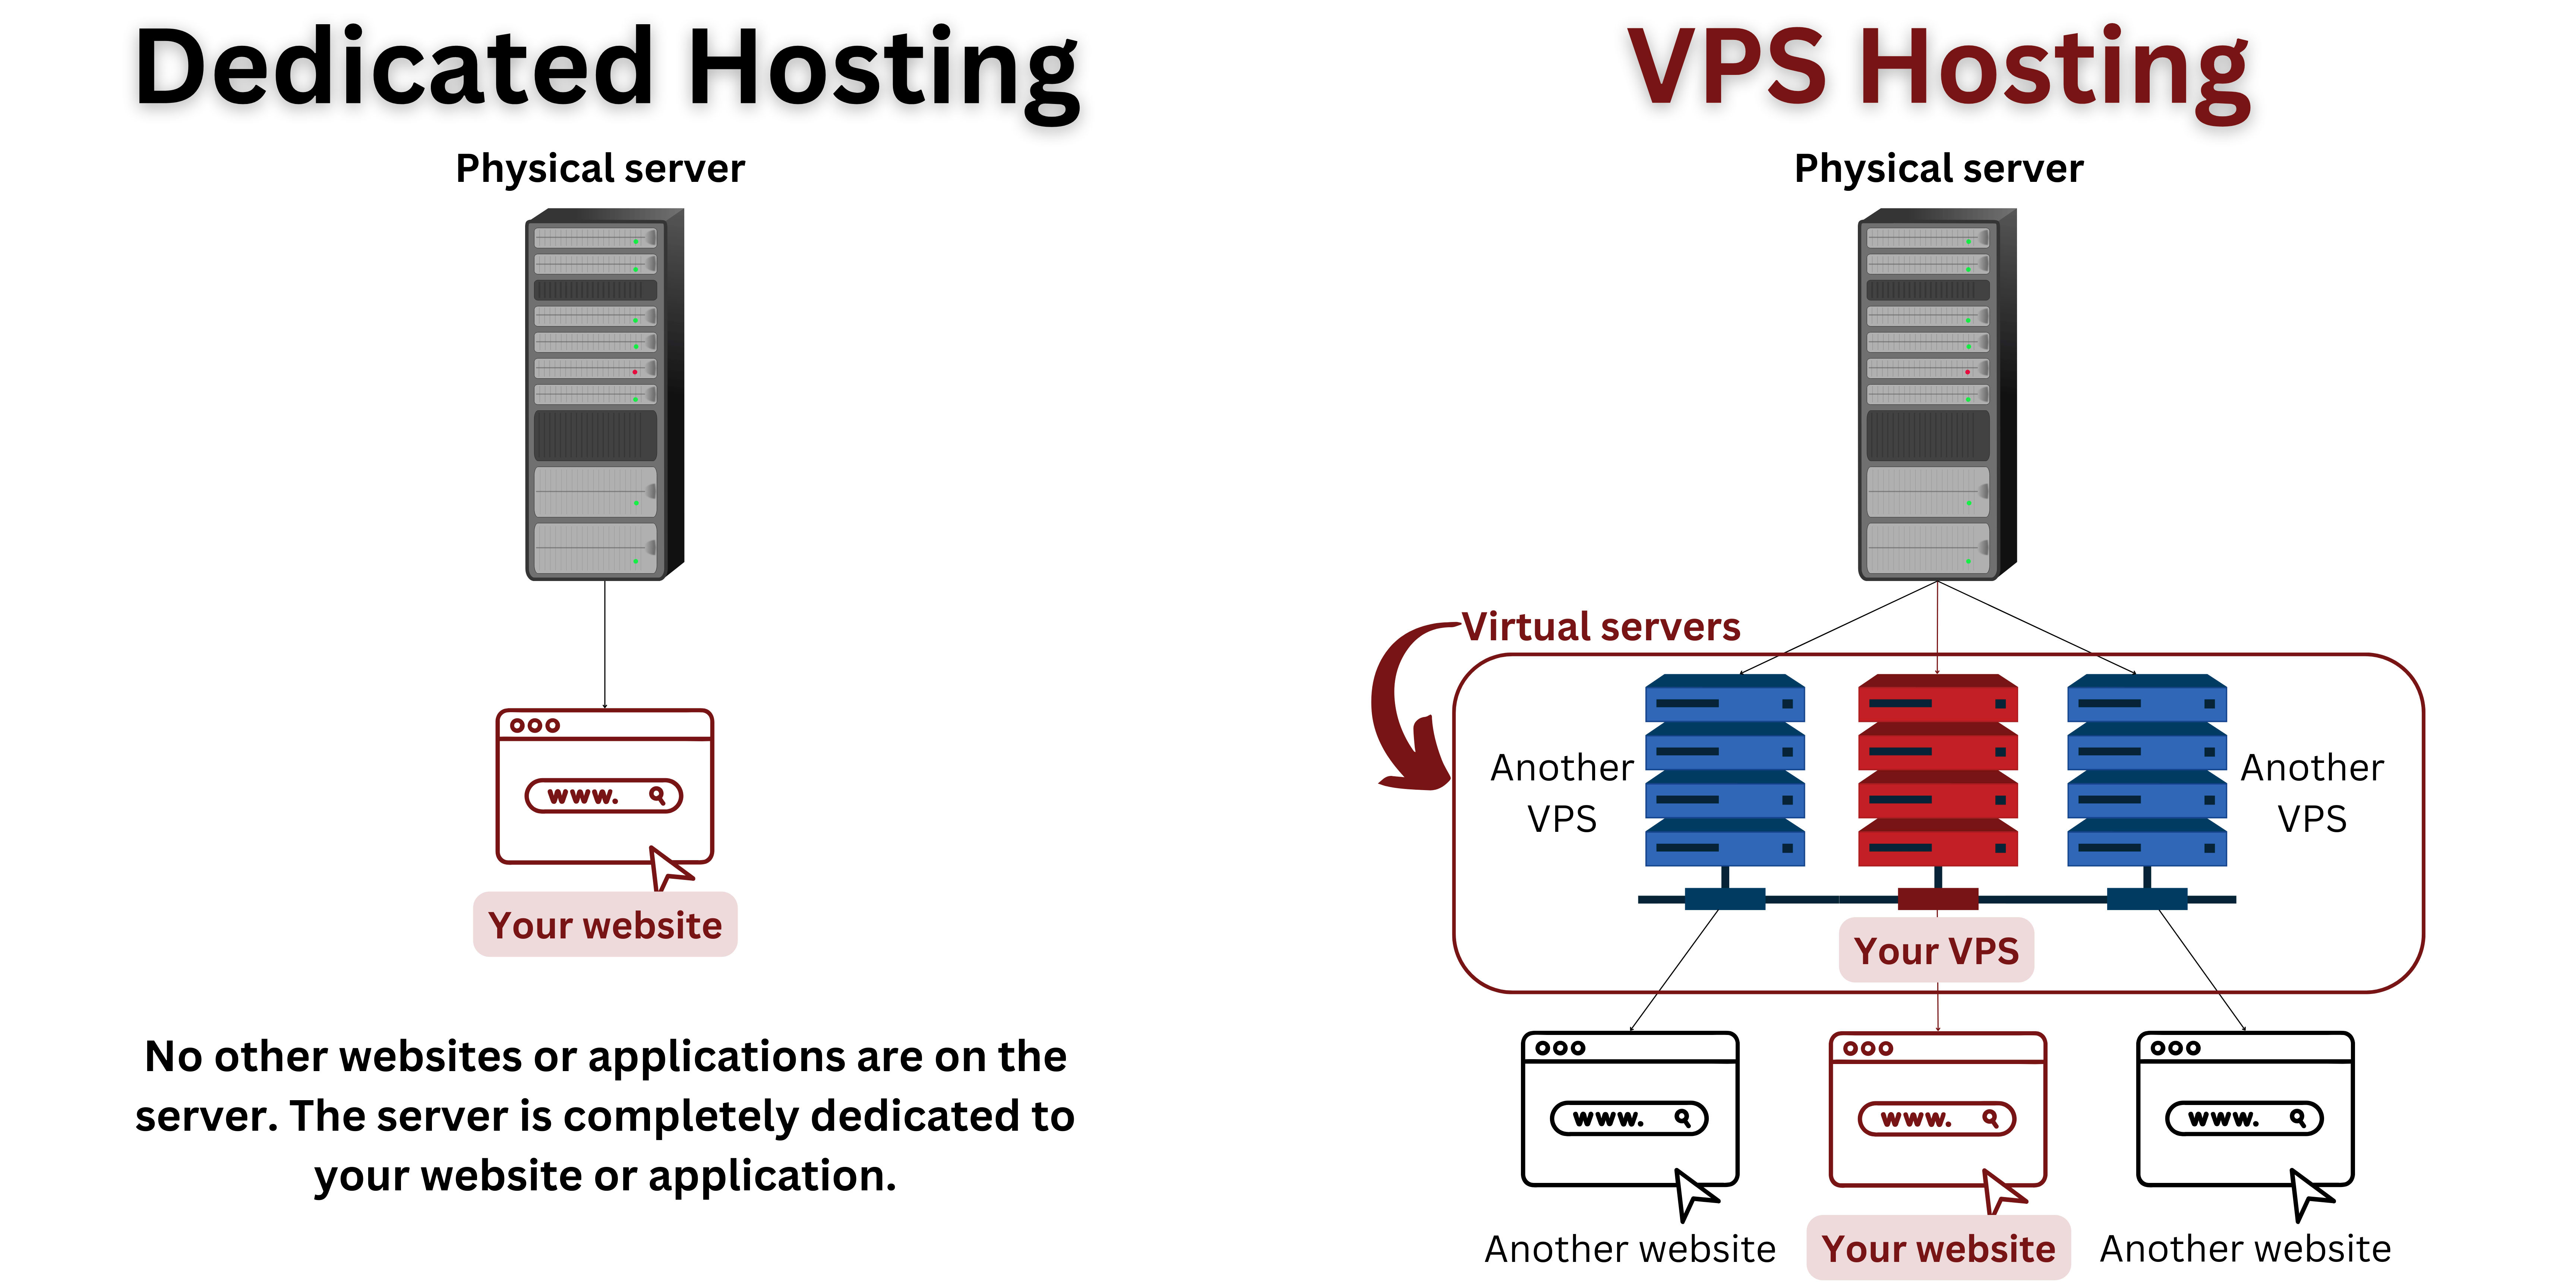 A visual representation of how dedicated hosting differs from VPS hosting.